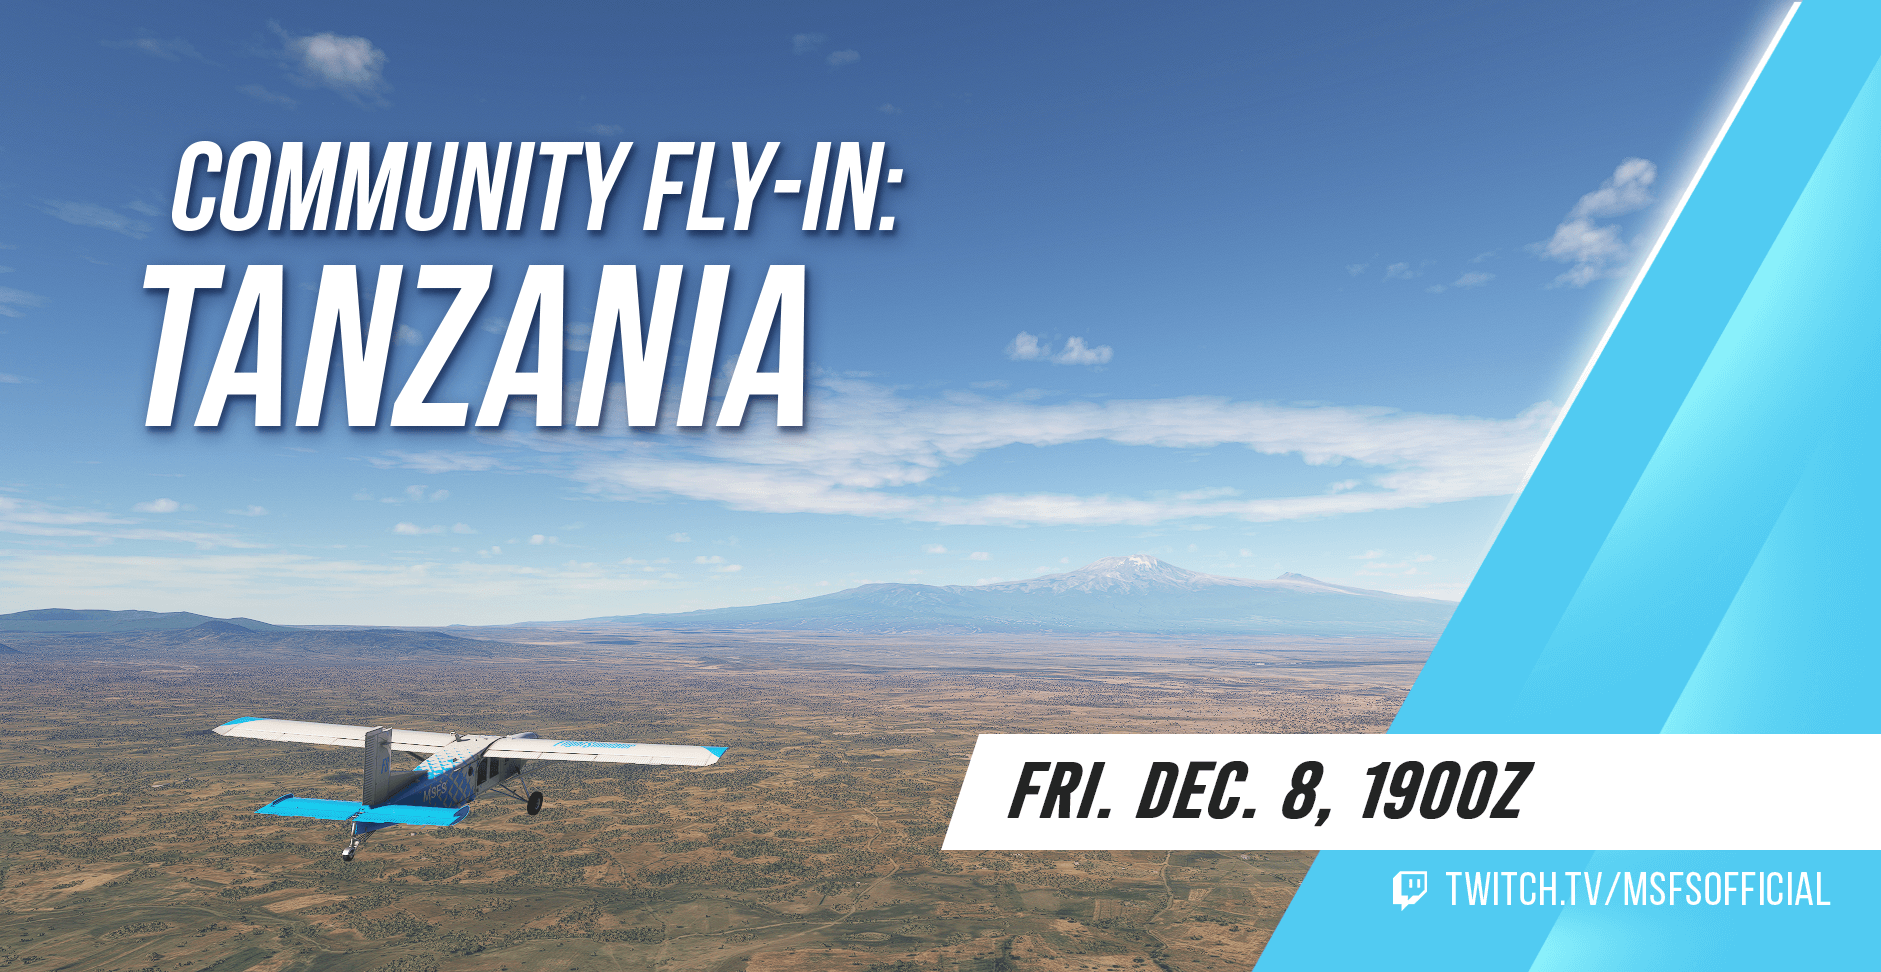 Community Fly-In: Tanzania. Friday December 8th 1900z. www.twitch.tv/msfsofficial